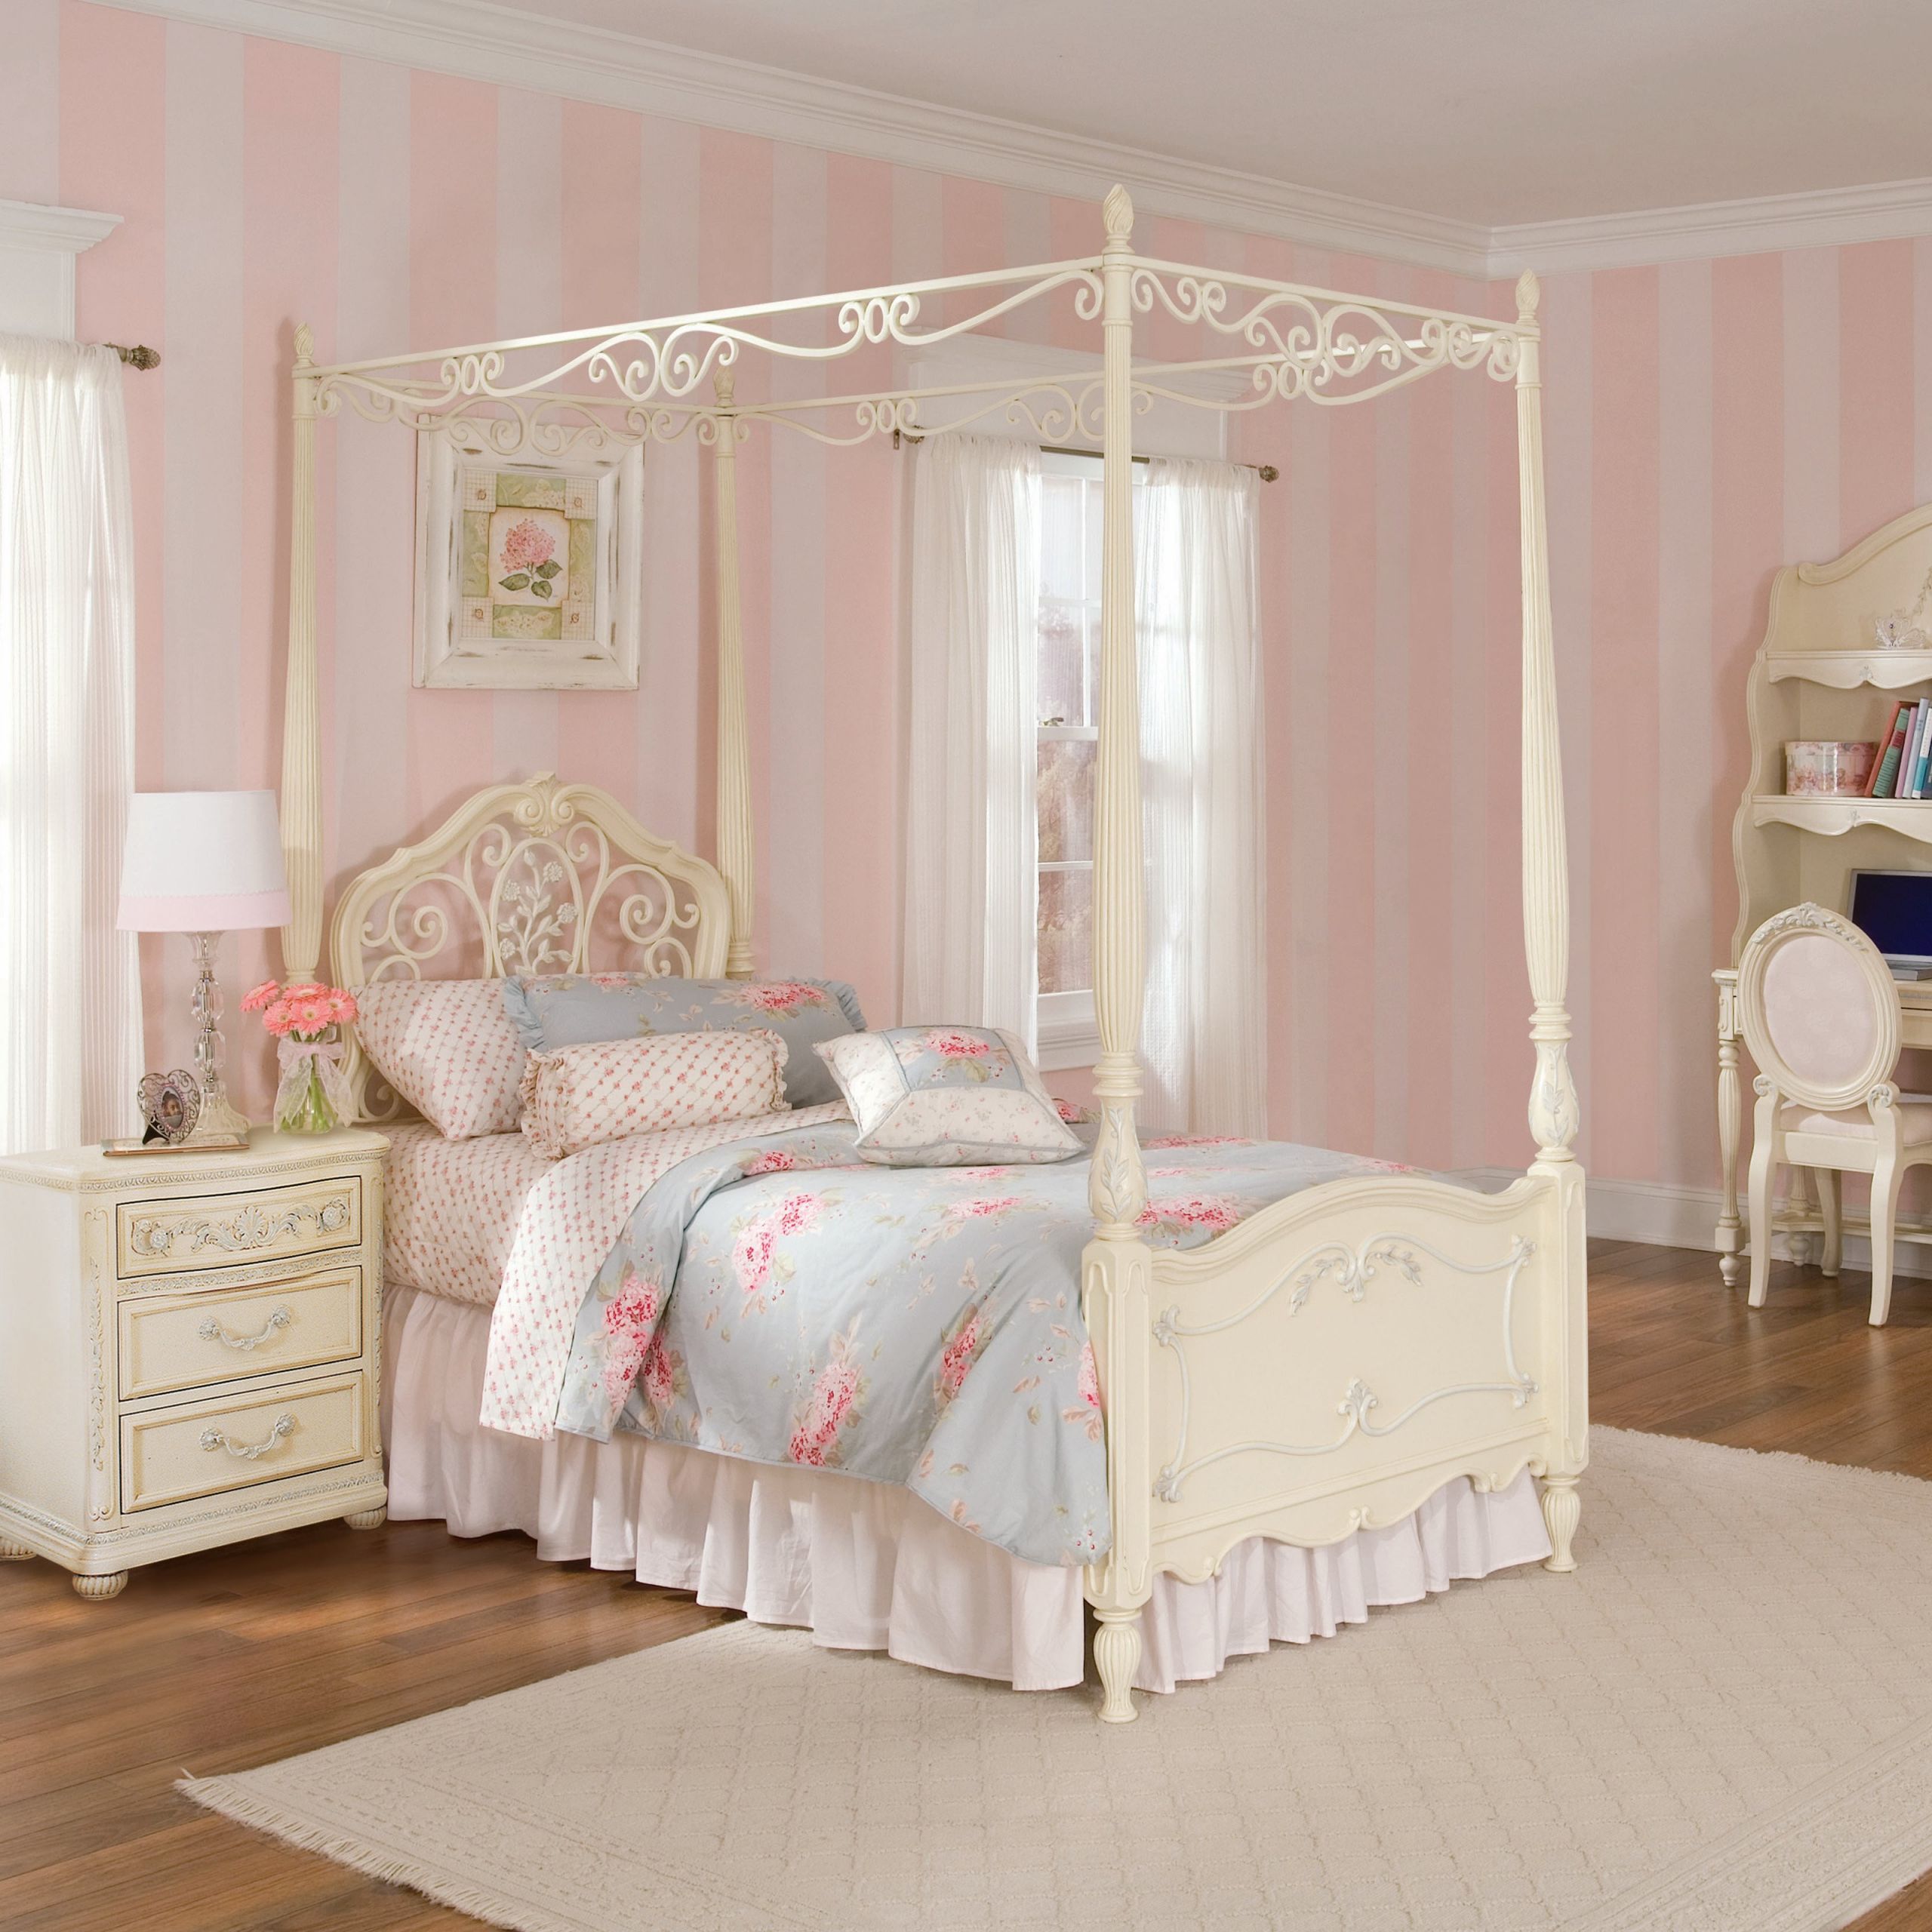 Canopy Girl Bedroom
 How to Make Girls Canopy Bed in Princess Theme MidCityEast